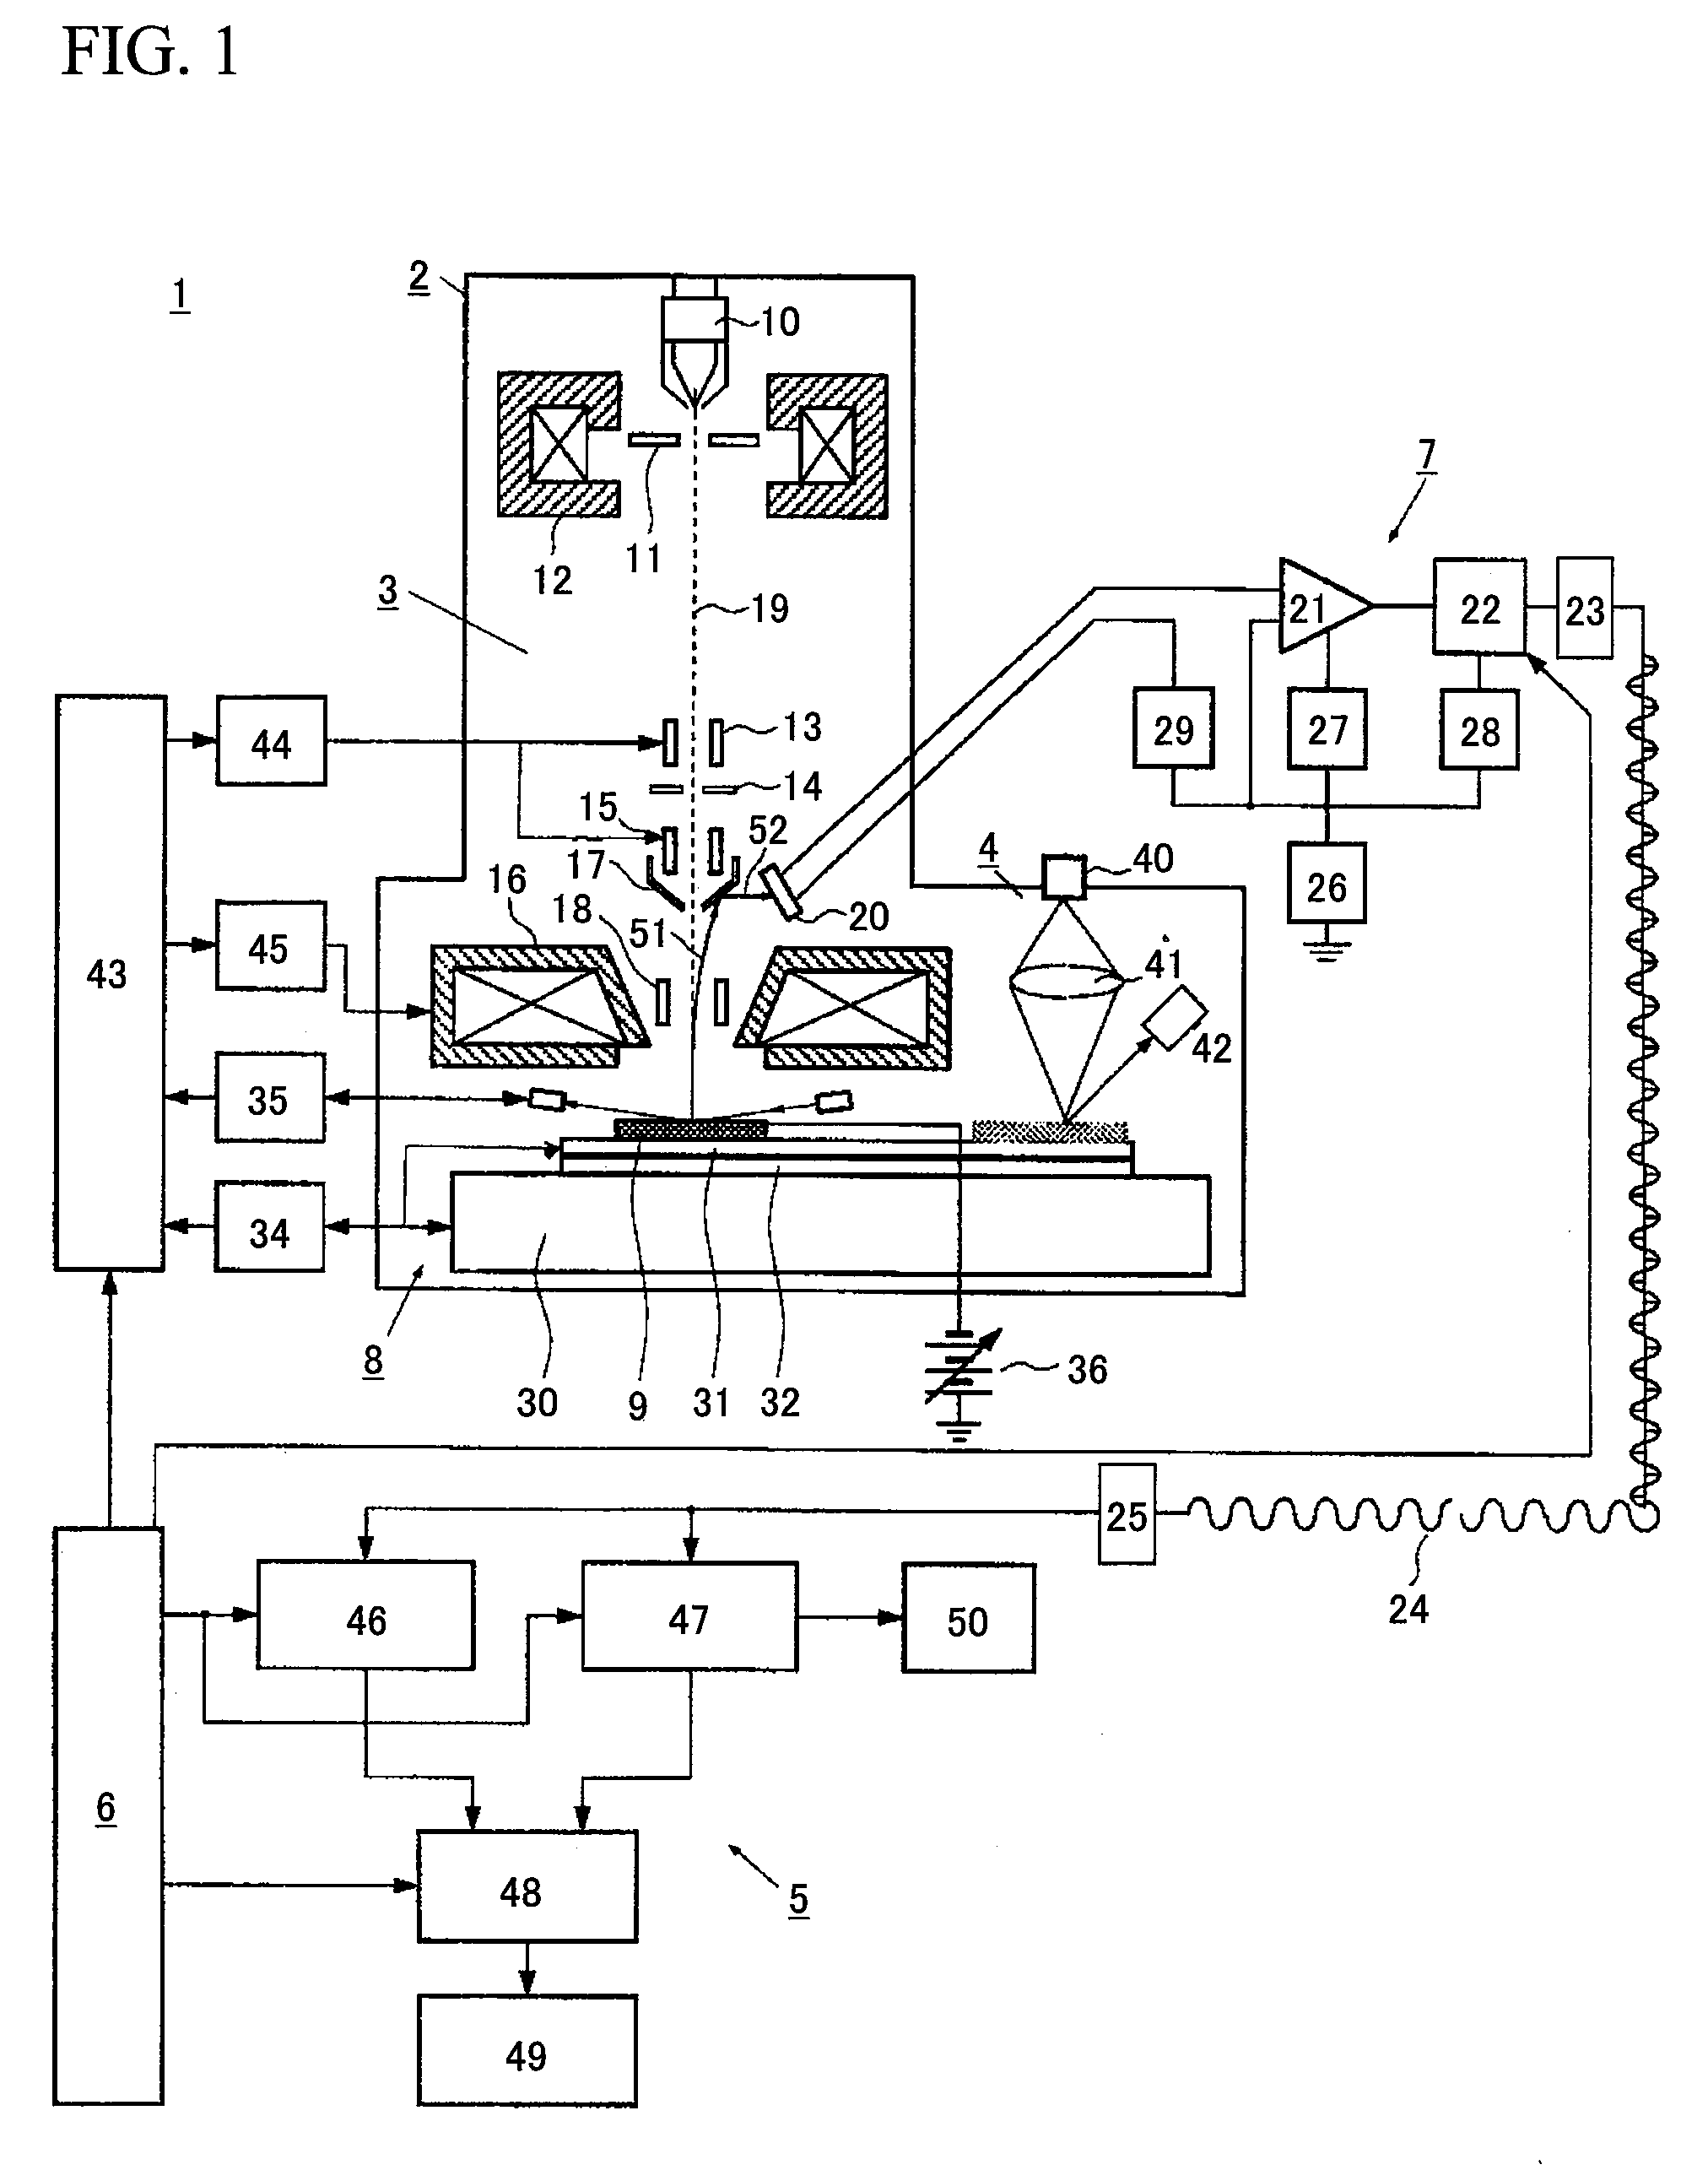 Apperance inspection apparatus with scanning electron microscope and image data processing method using scanning electron microscope